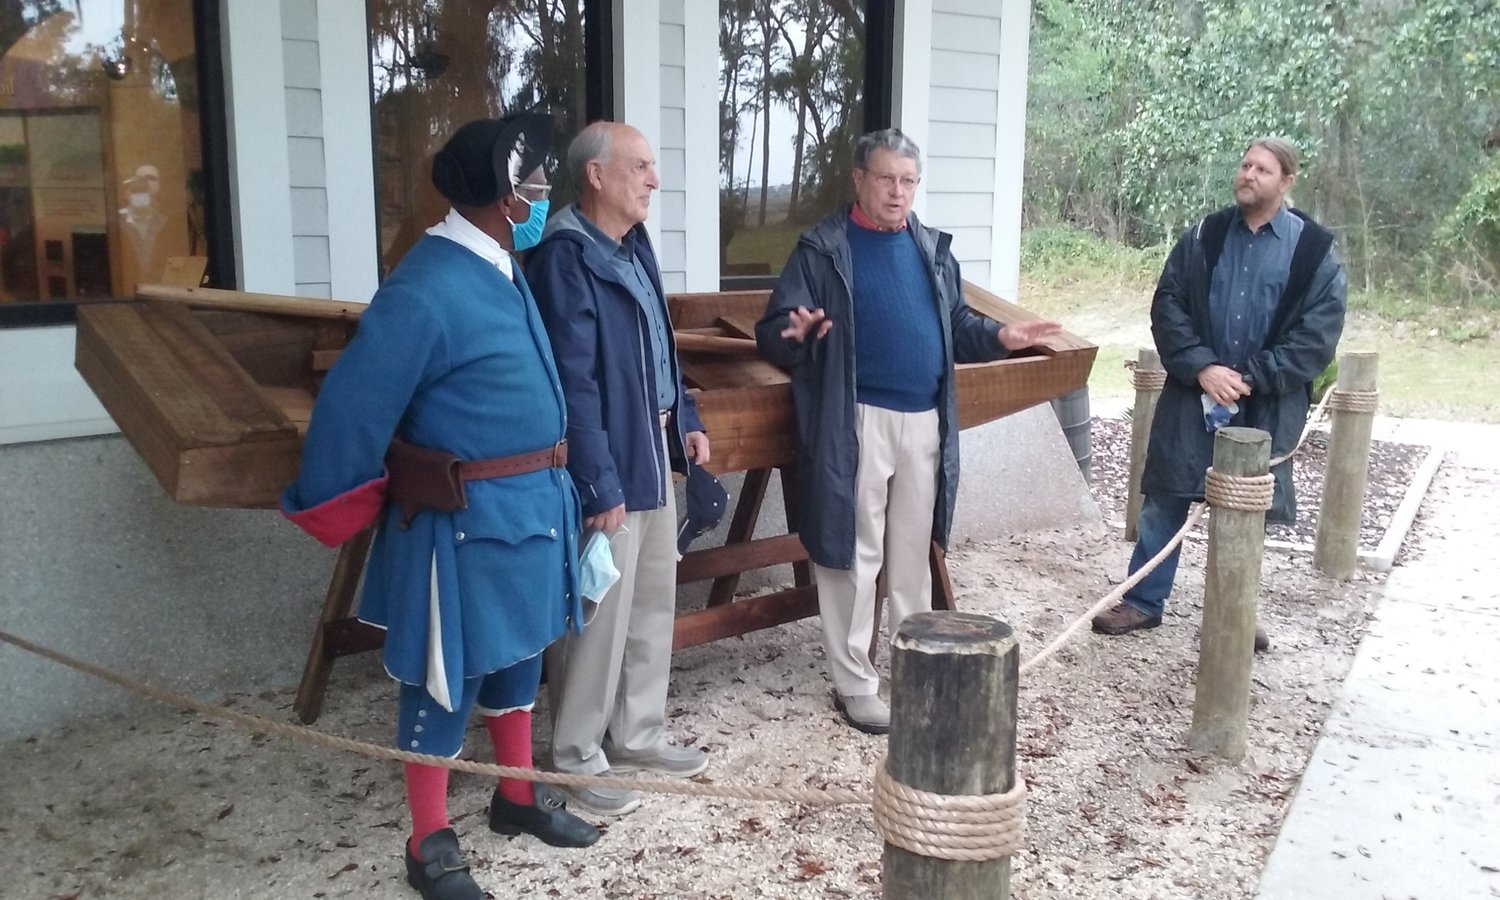 Standing in front of the barca chata are, from left, Fort Mose Historical Society President Charles E. Ellis, boat builders Gene Veltri and Steve McMullen, and archaeologist Chuck Meide.